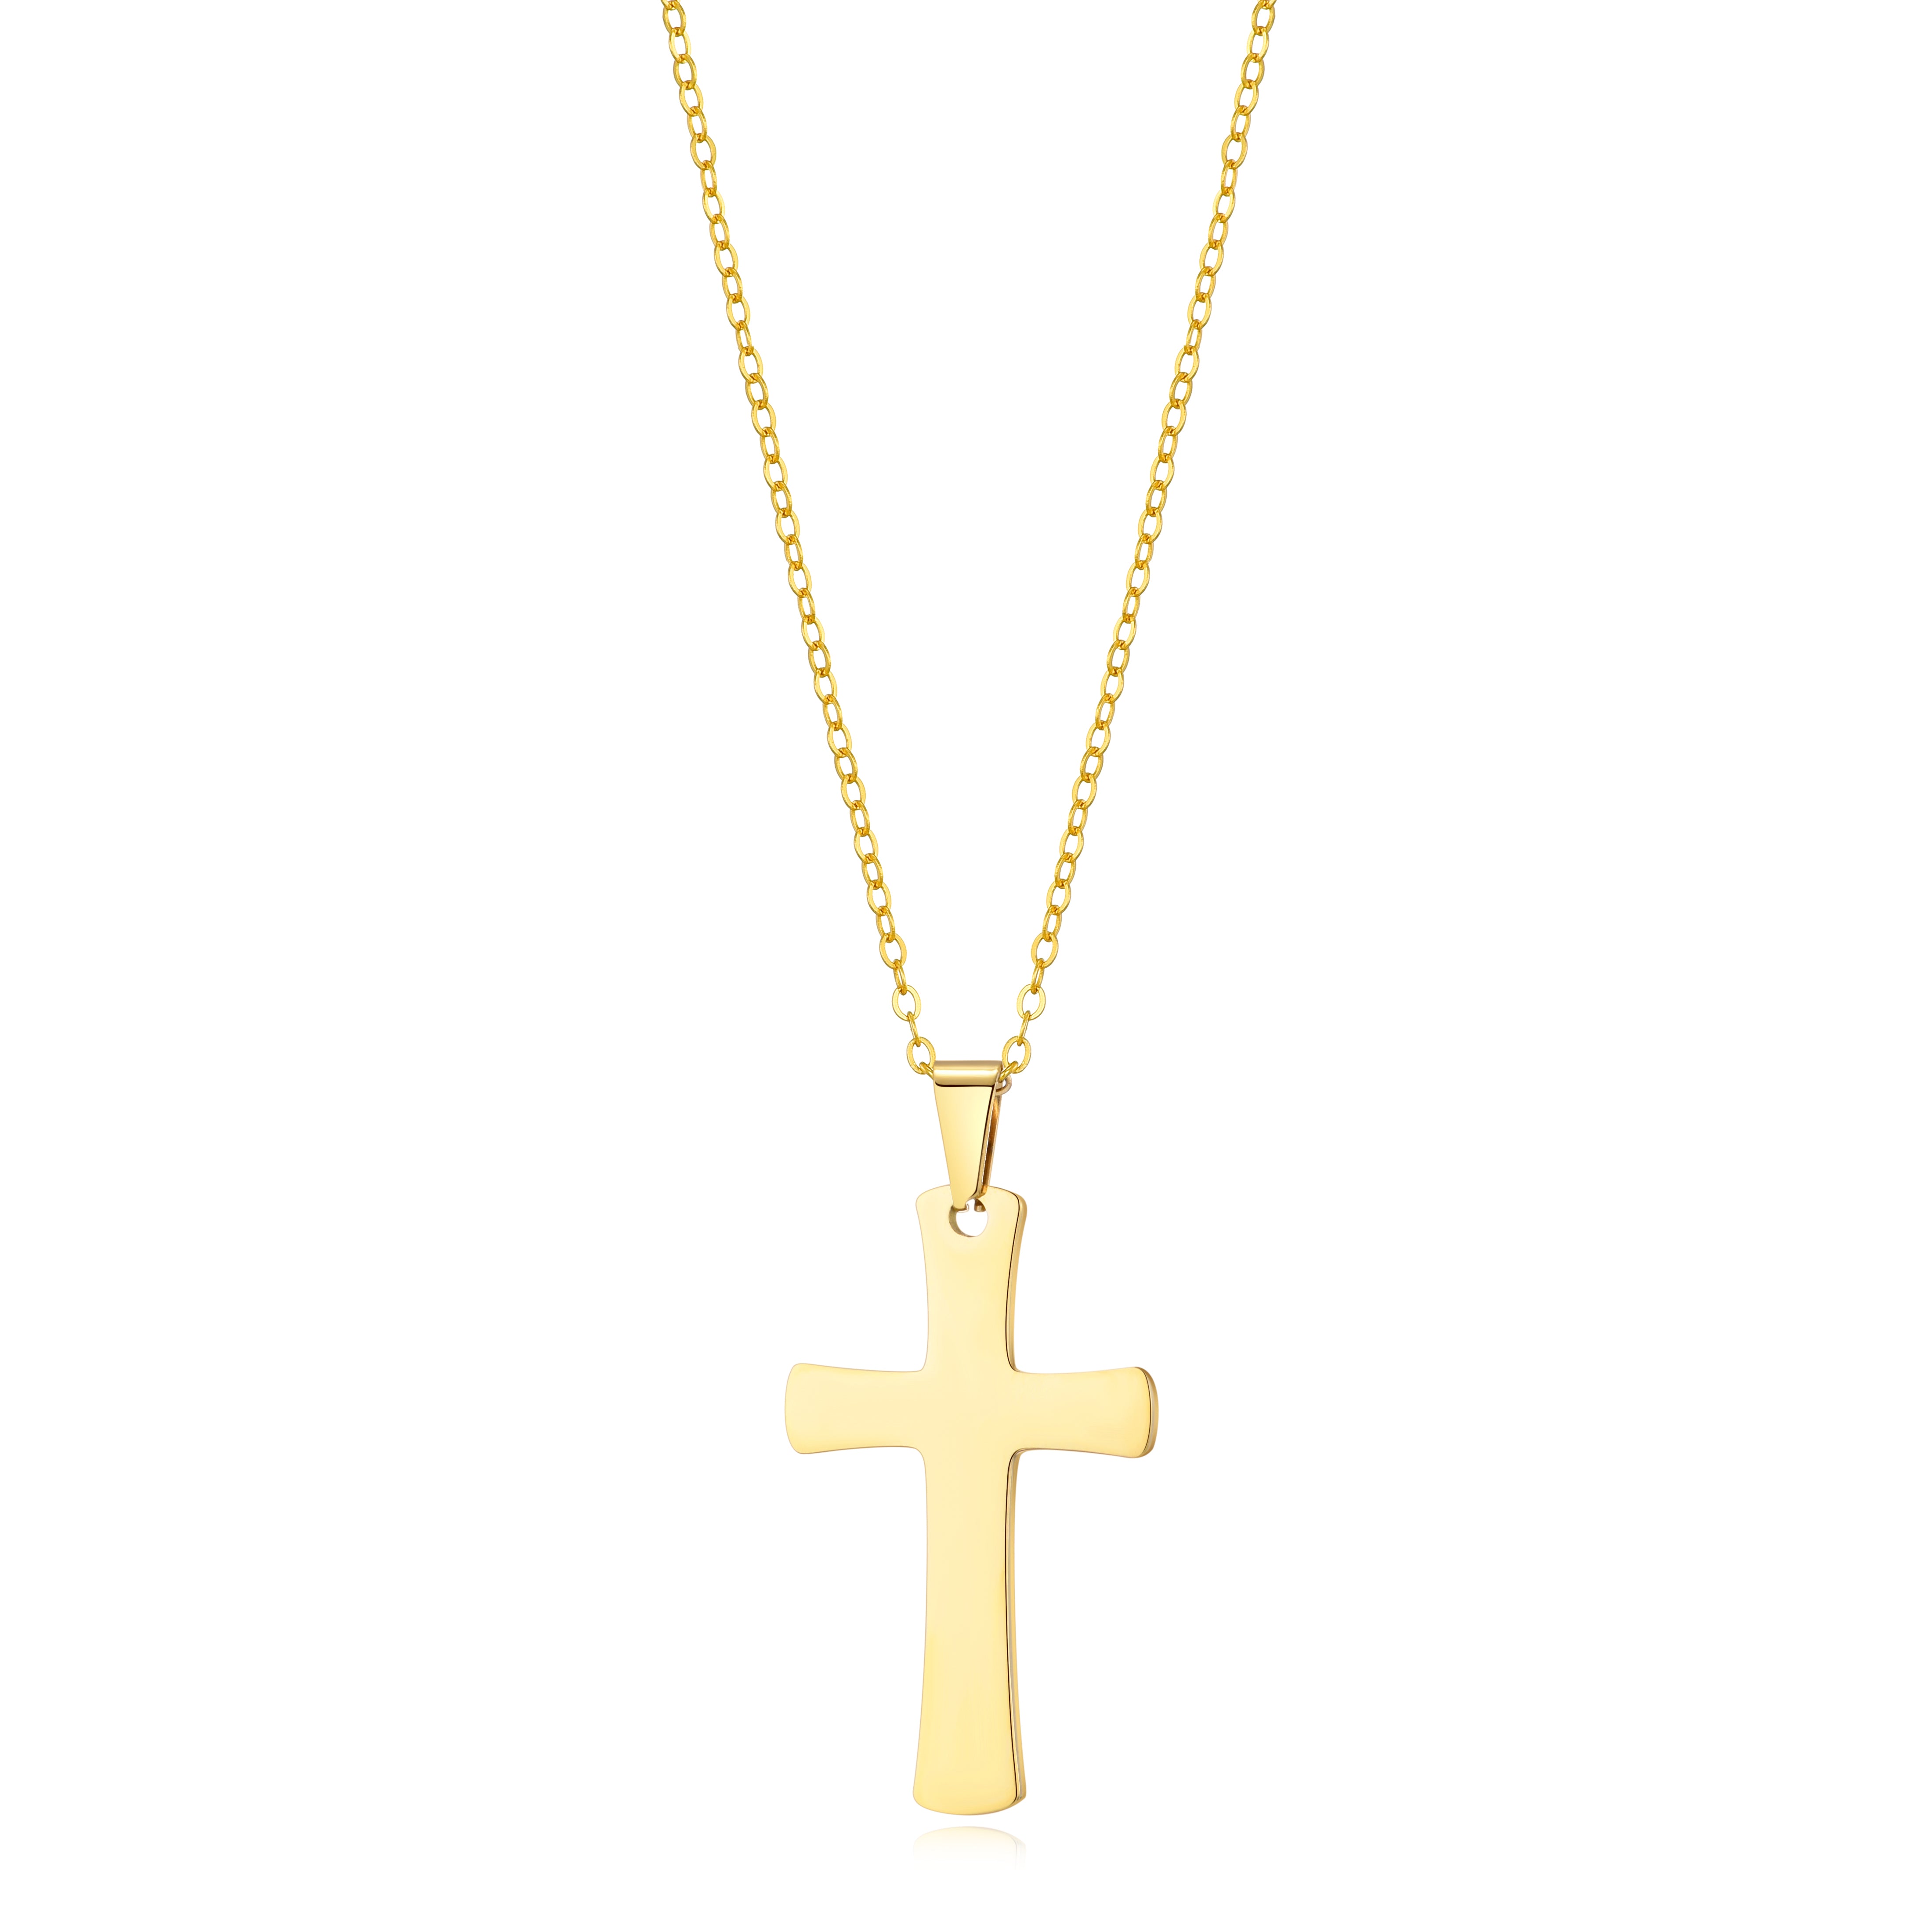 Men's Gold Plated Steel Cross Necklace